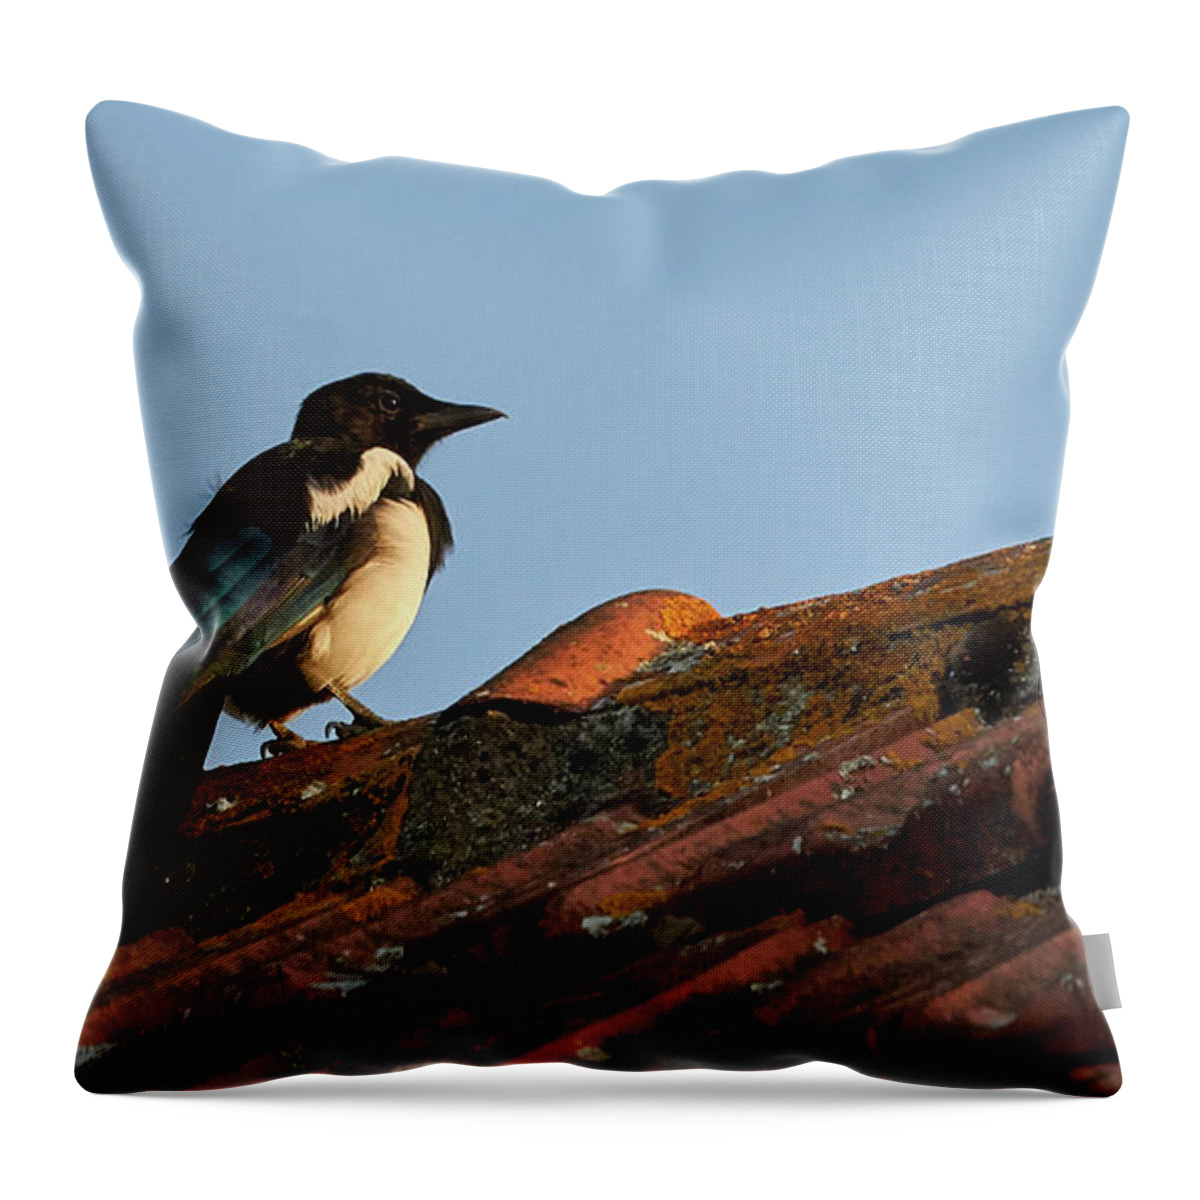 Colorful Throw Pillow featuring the photograph Eurasian Magpie Pica Pica on Tiled Roof by Pablo Avanzini